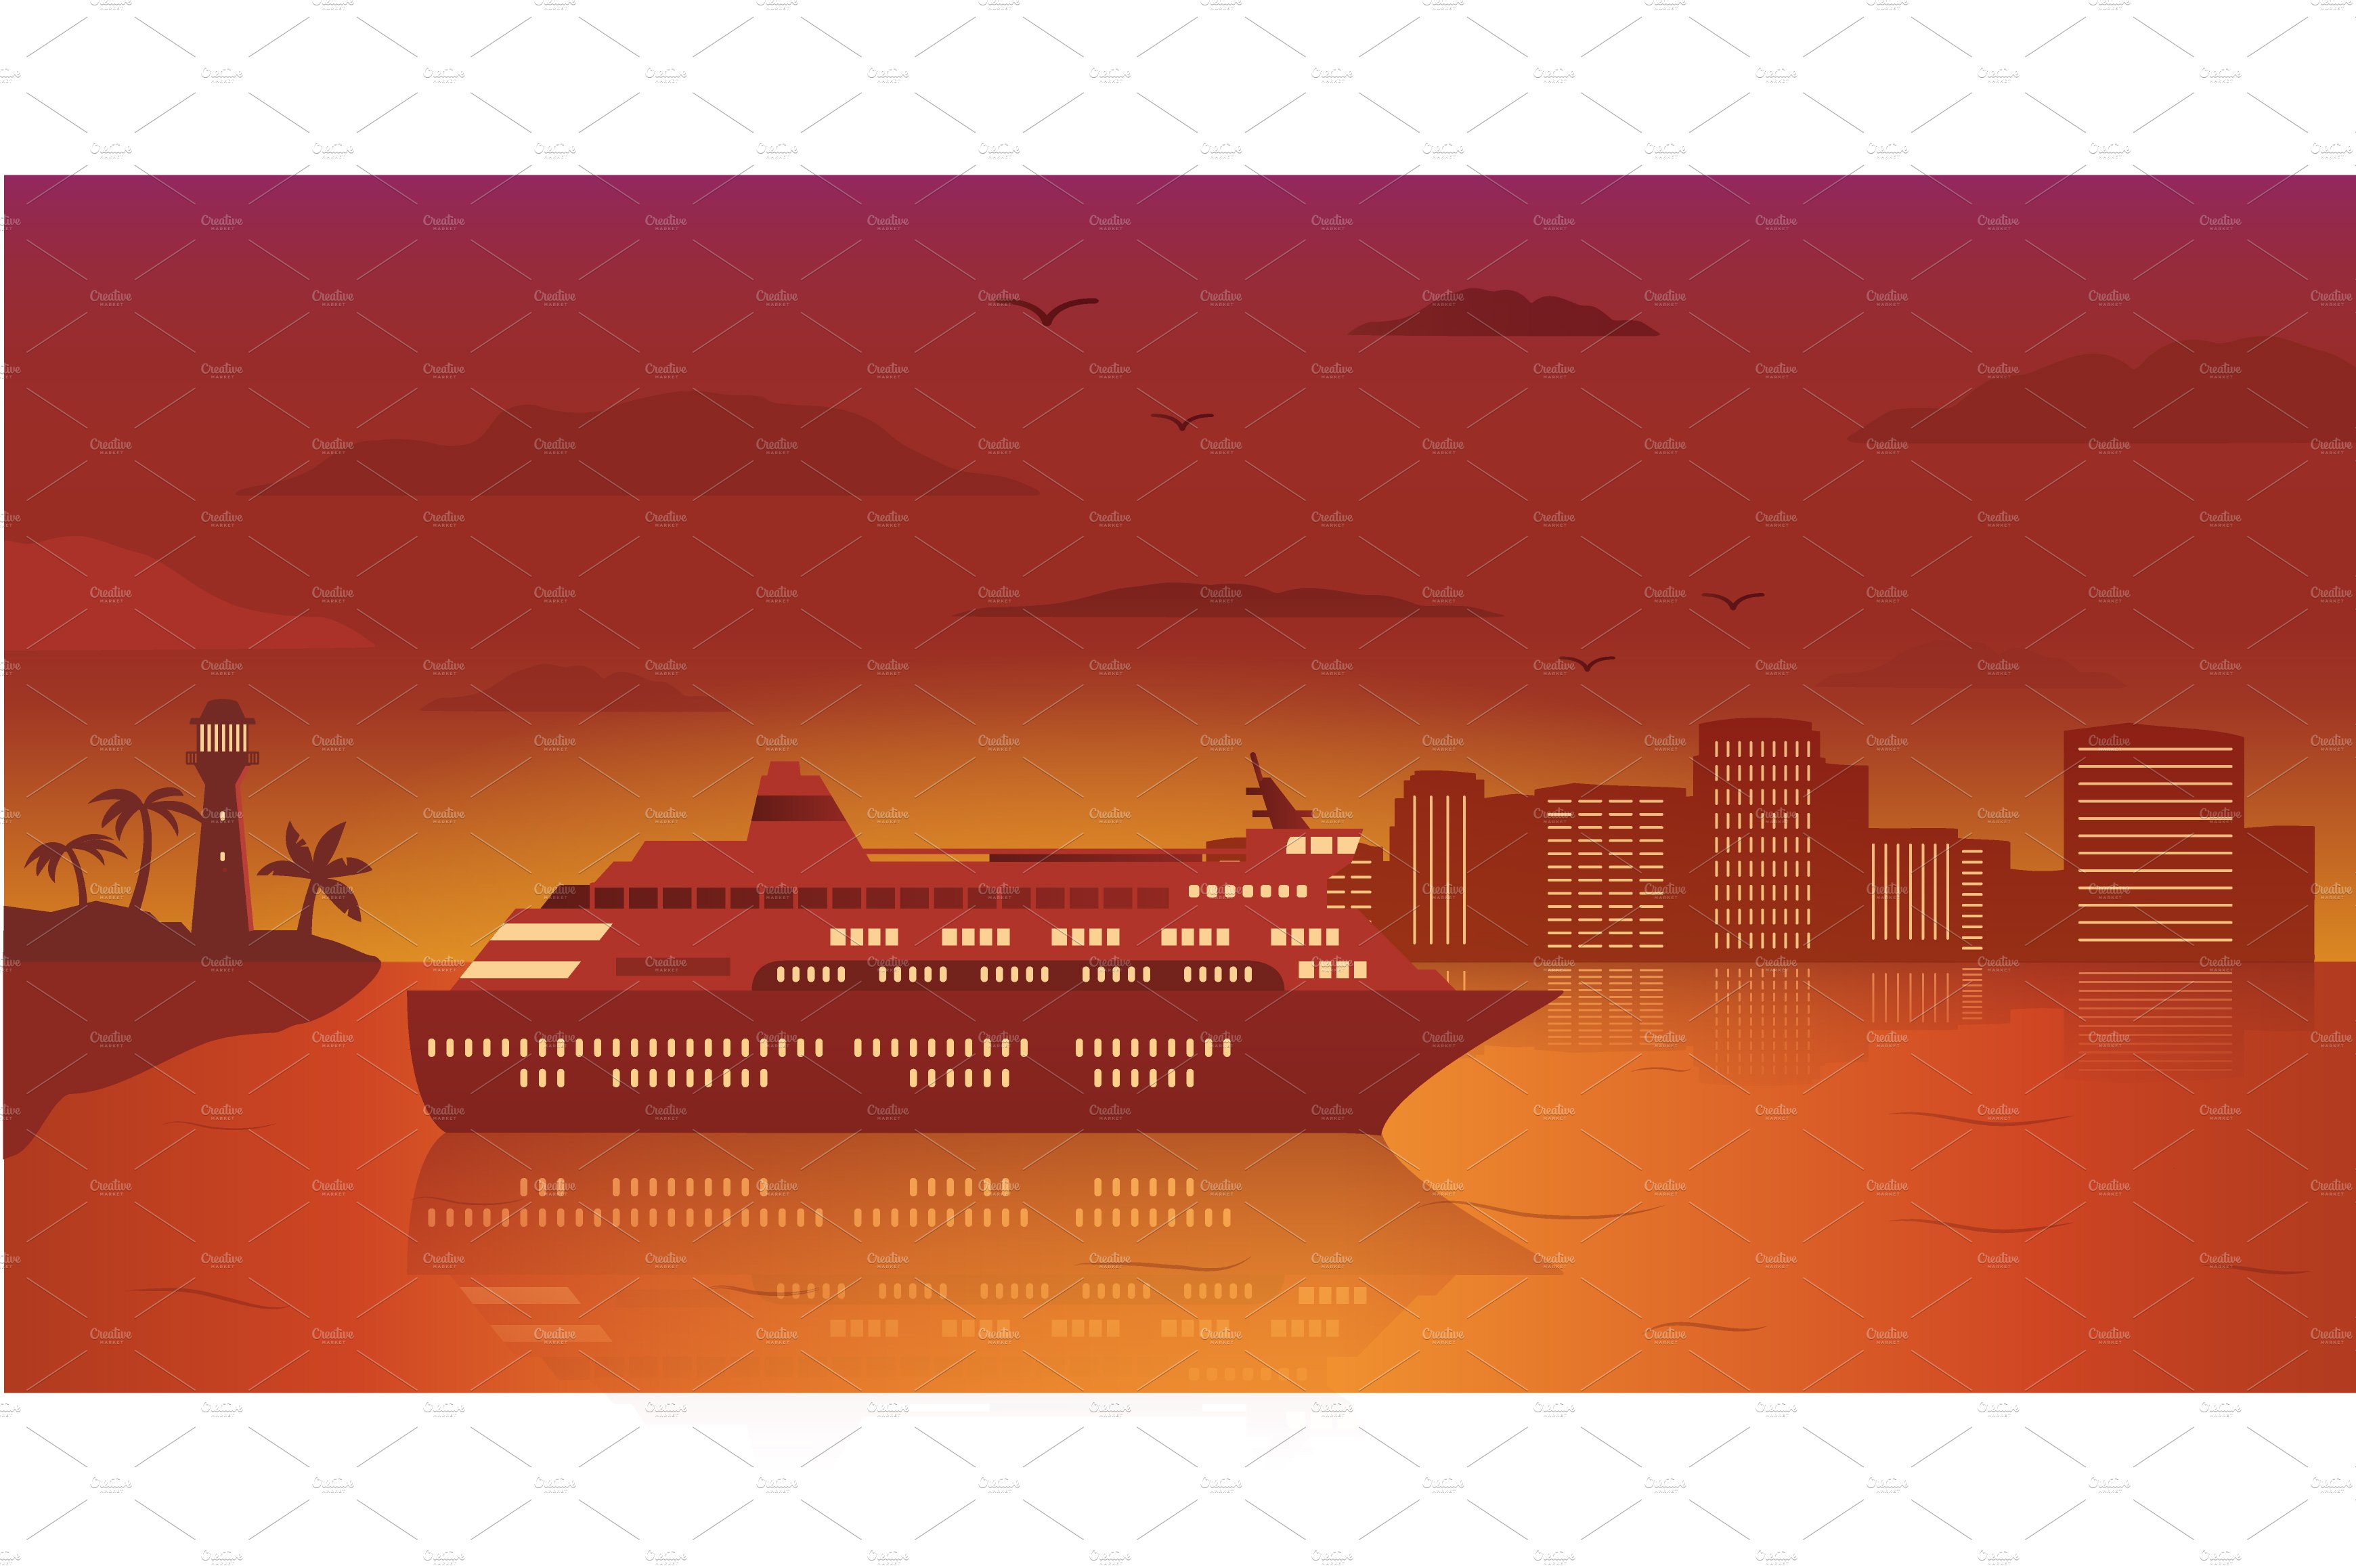 Cruise ocean liner. cover image.